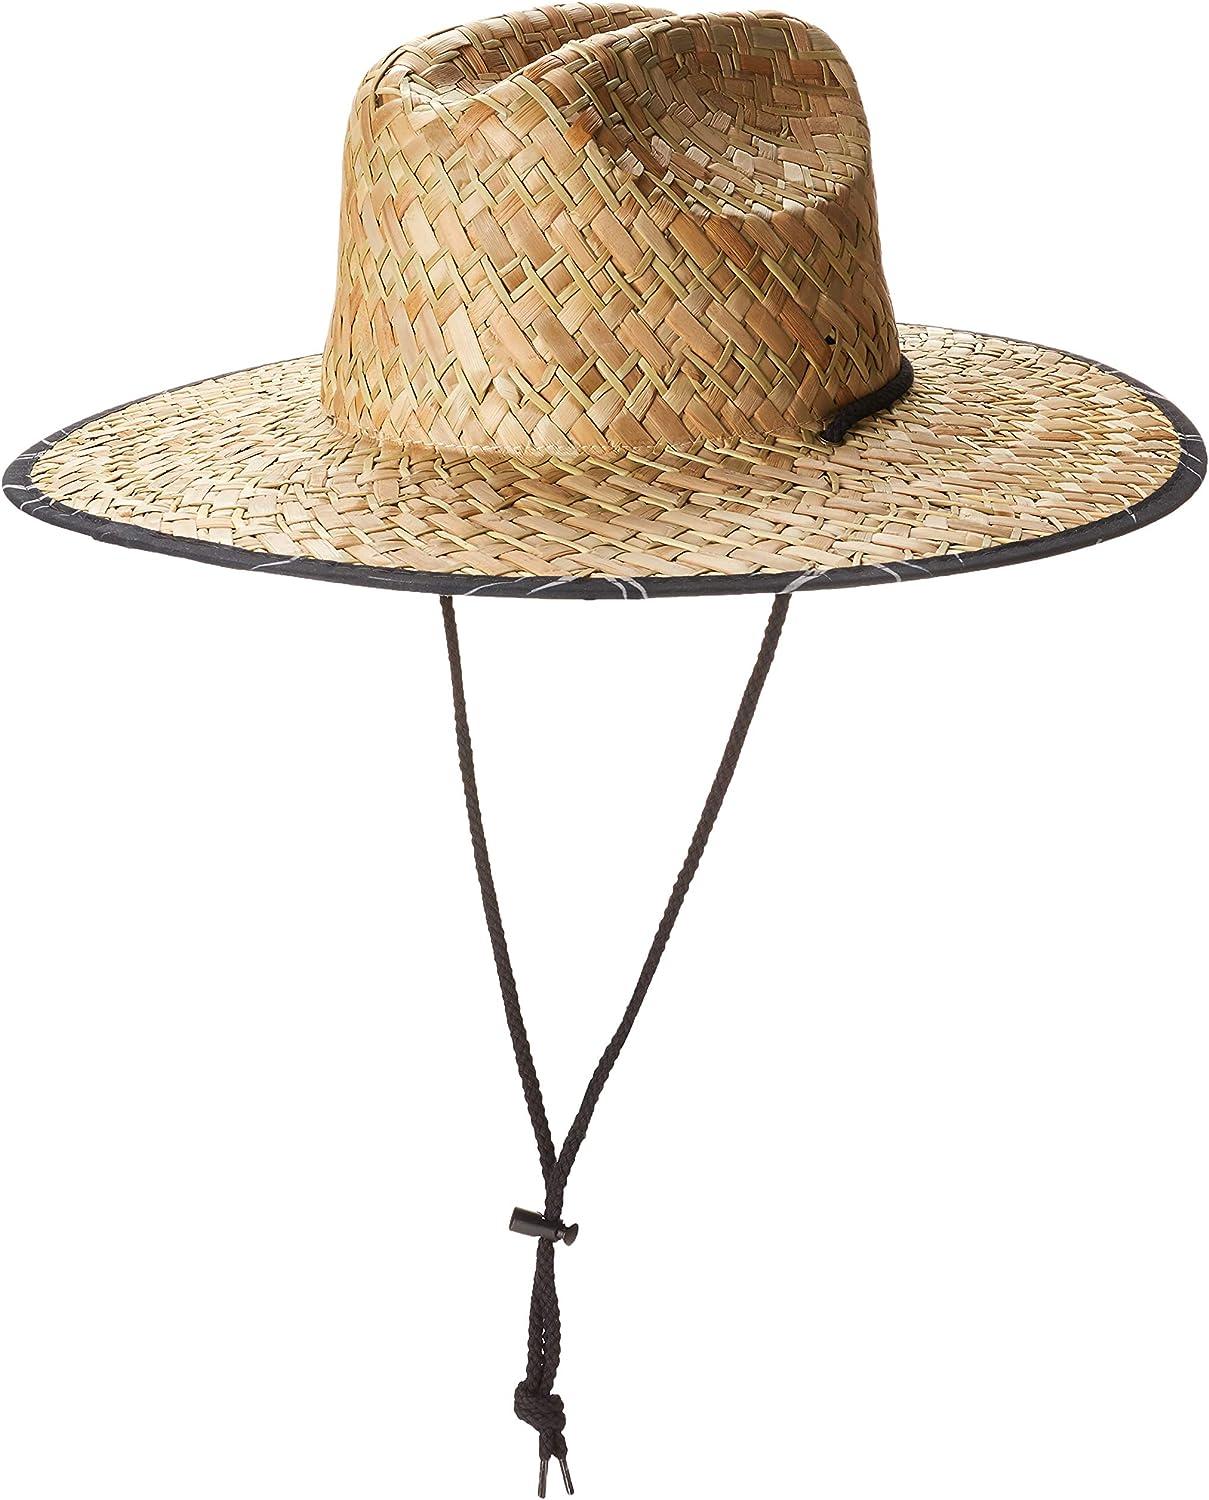 Quiksilver Men's Outsider Waterman Sun Protection Lifeguard Straw Hat  Large-X-Large Black Outsider Waterman